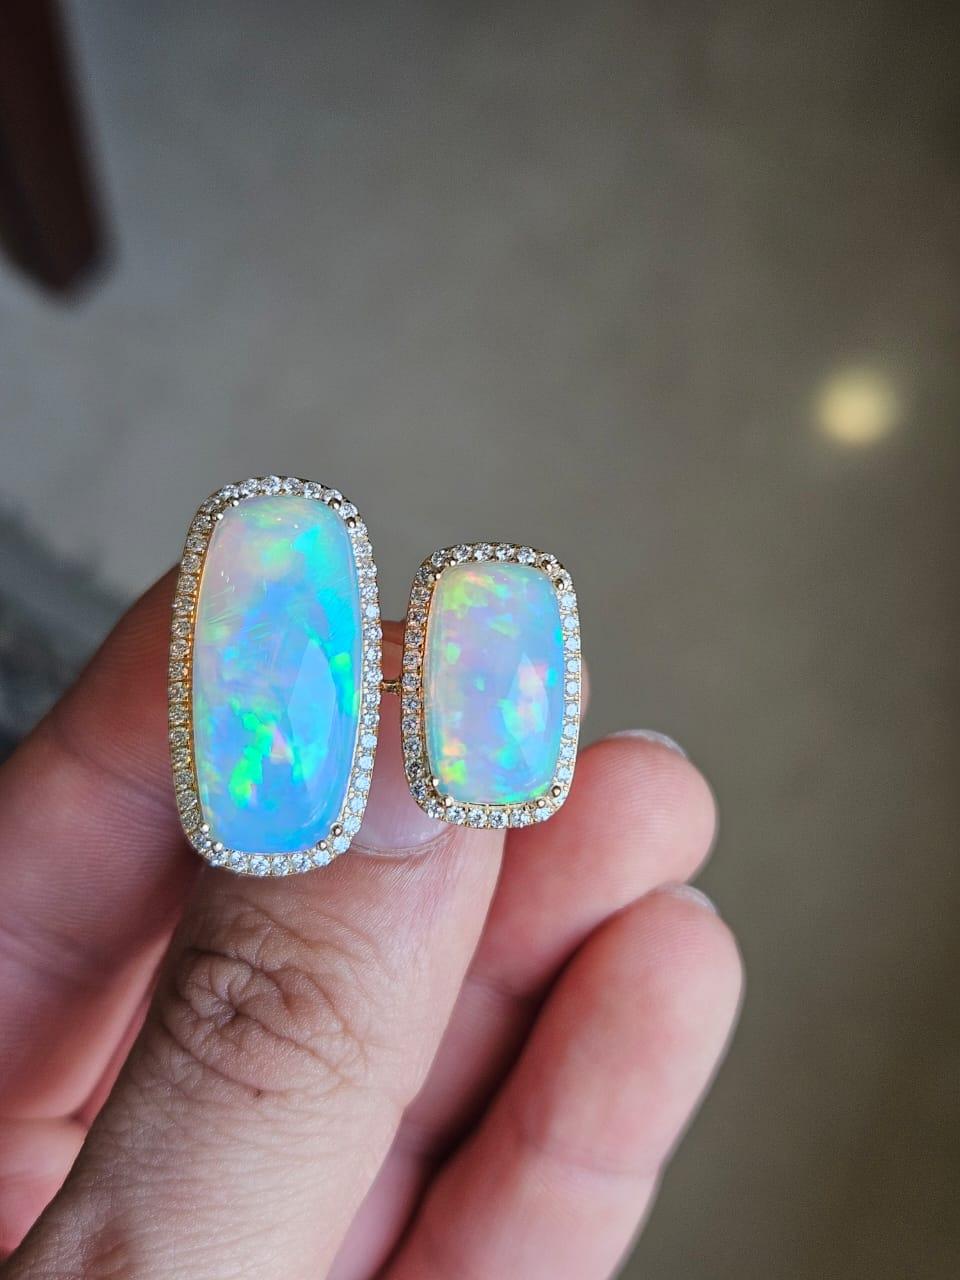 A very gorgeous and beautiful, Opal Cocktail Ring set in 18K Yellow Gold & Diamonds. The weight of the two Opal pieces is 14.04 carats. The Diamonds weight is 0.68 carats. Net 18K Gold weight is 6.29 grams. The gross weight of the Ring is 9.24